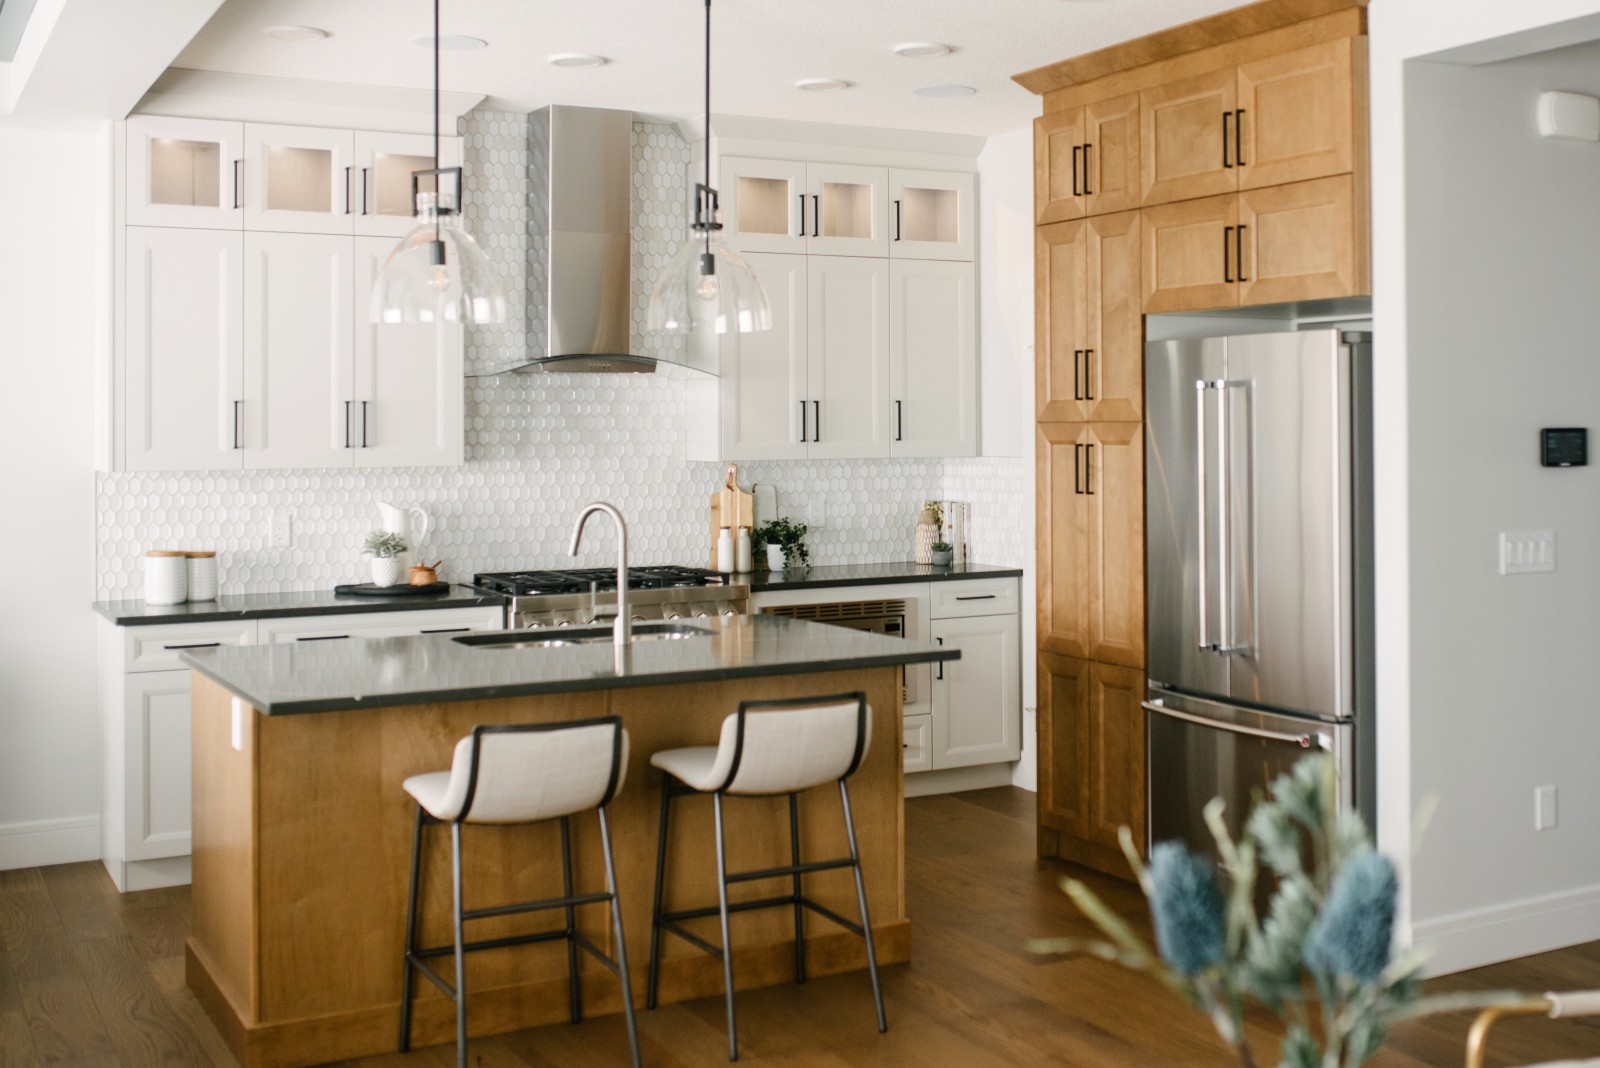 A two-toned white and warm wood kitchen with dark countertops and complimenting hardwood floors